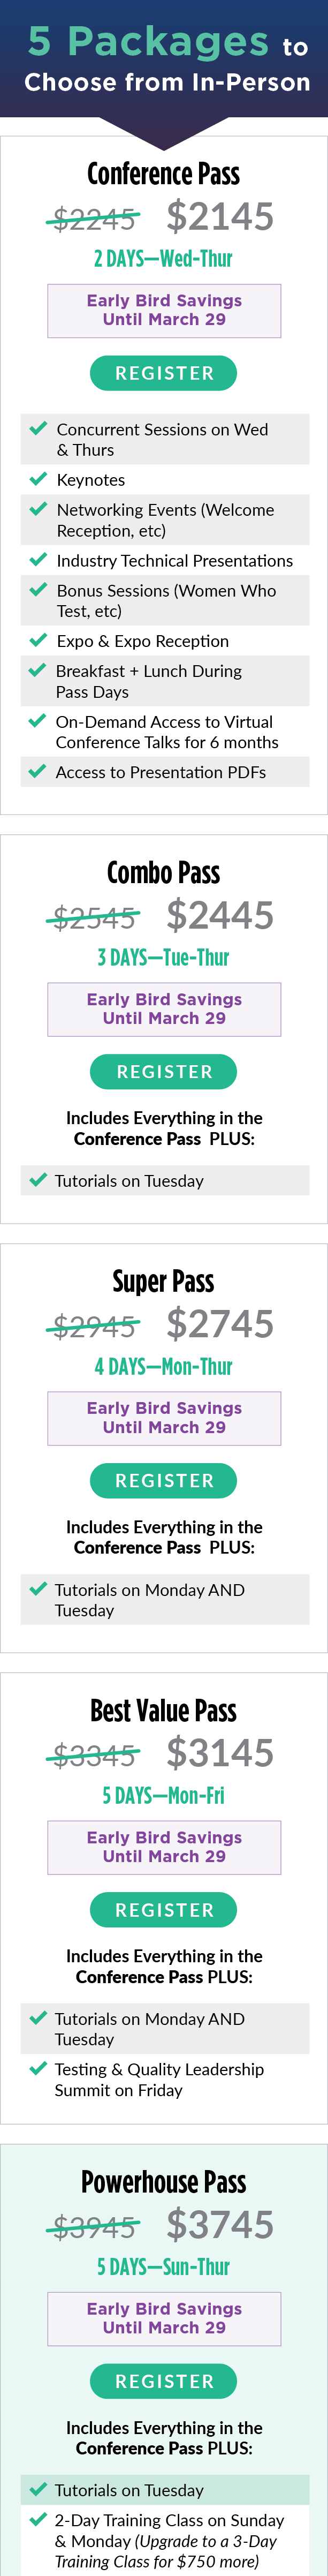 Mobile In-Person Passes